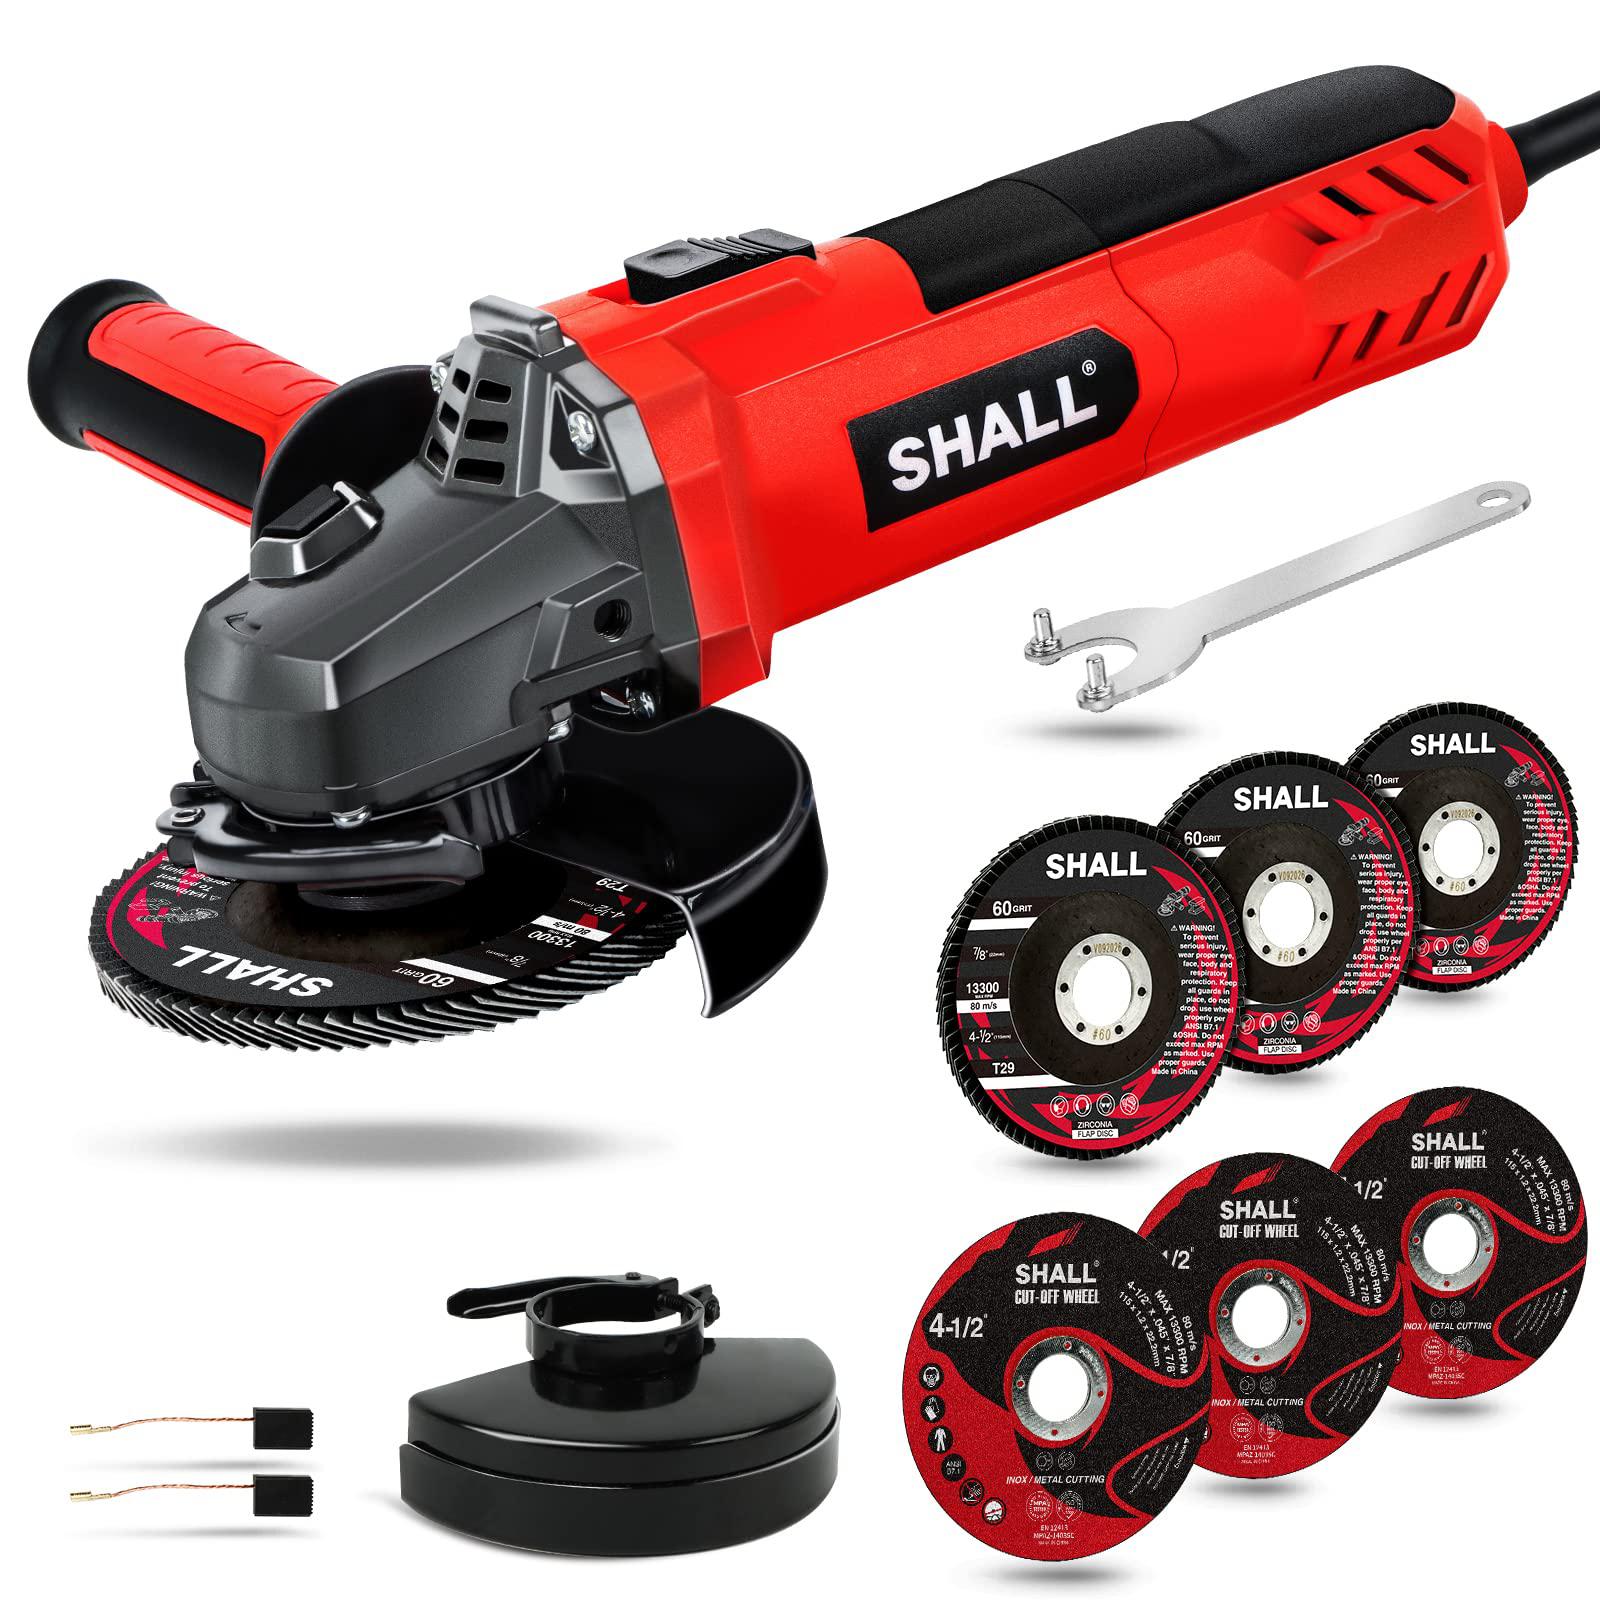 SHALL Angle Grinder Tool 7.5Amp 4-1/2 Inch Grinders Power Tools, Electric Metal Grinder 12000 RPM with 2 Safety Guards, 3 Cuttin